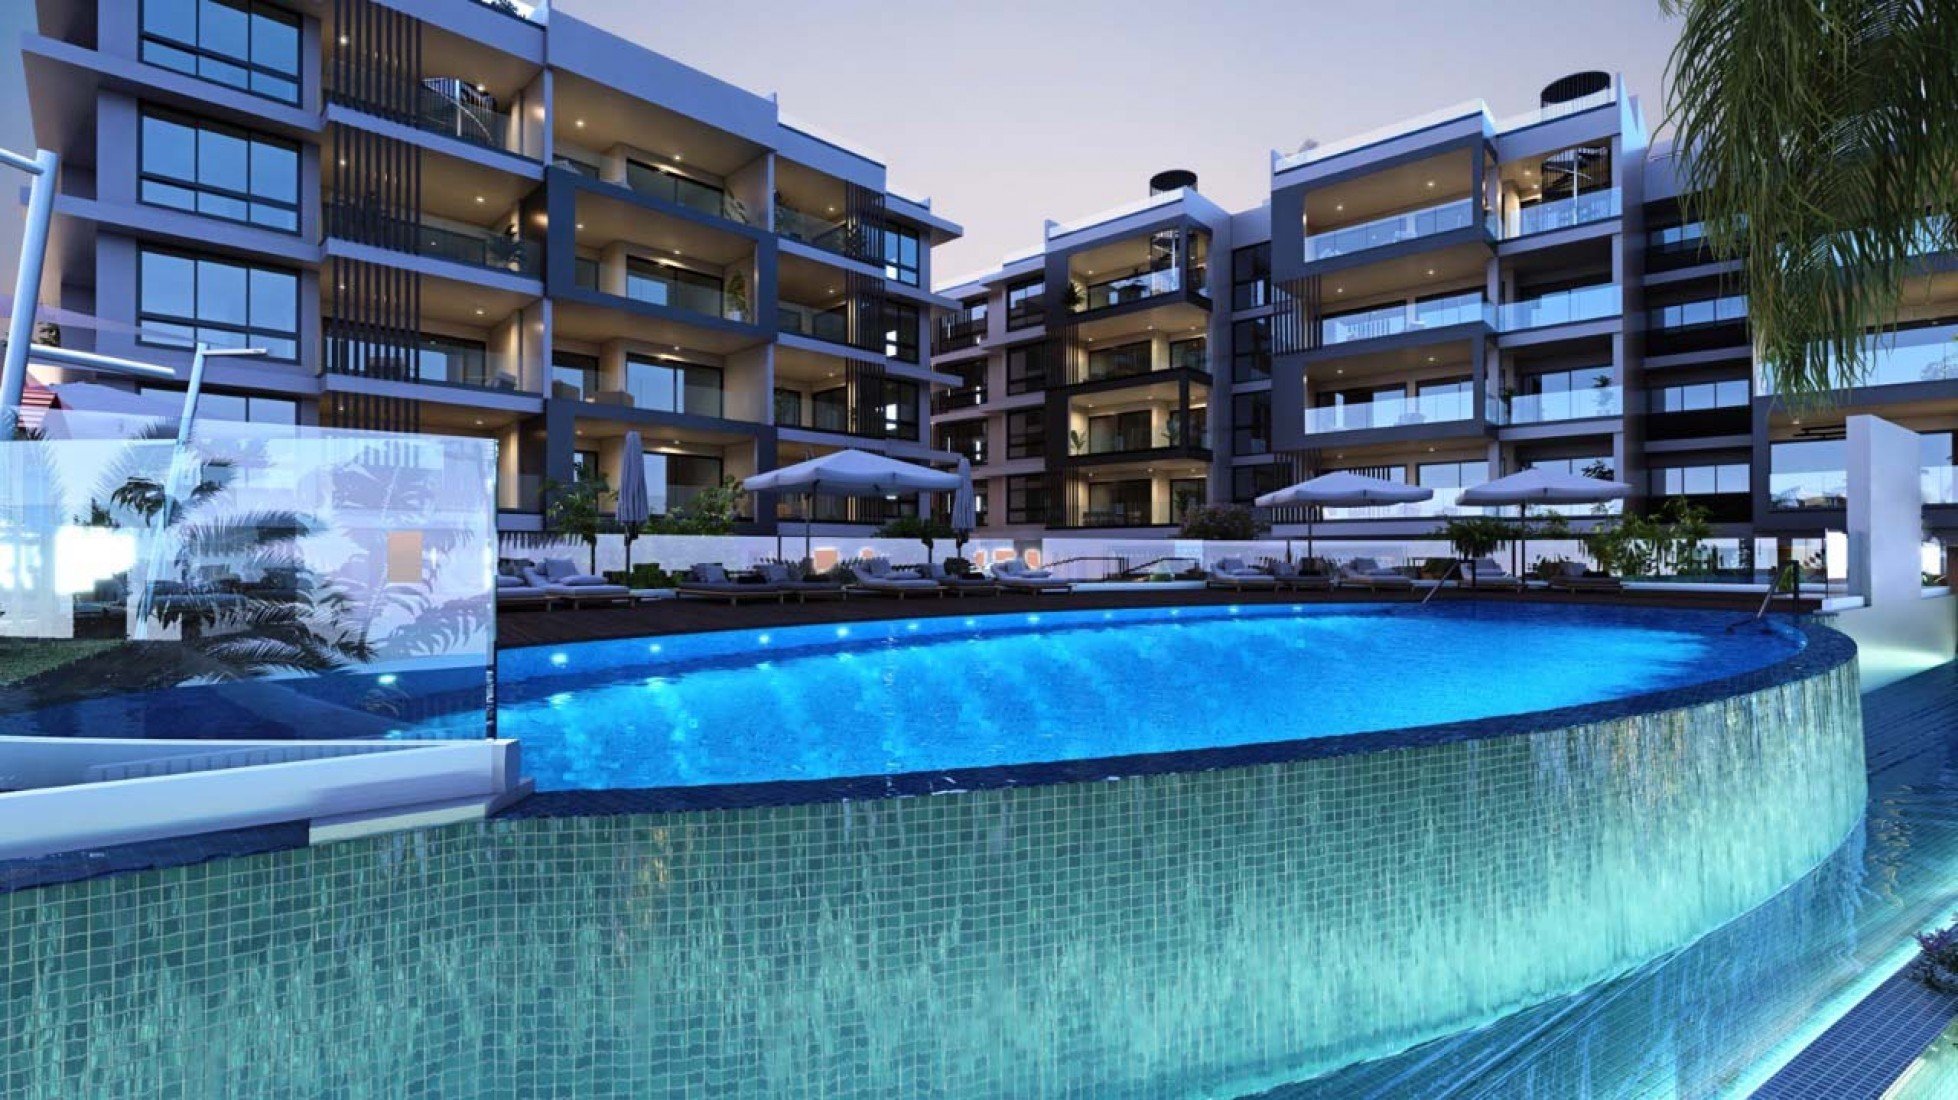 Apartment for sale in Larnaca, Cyprus 867002214